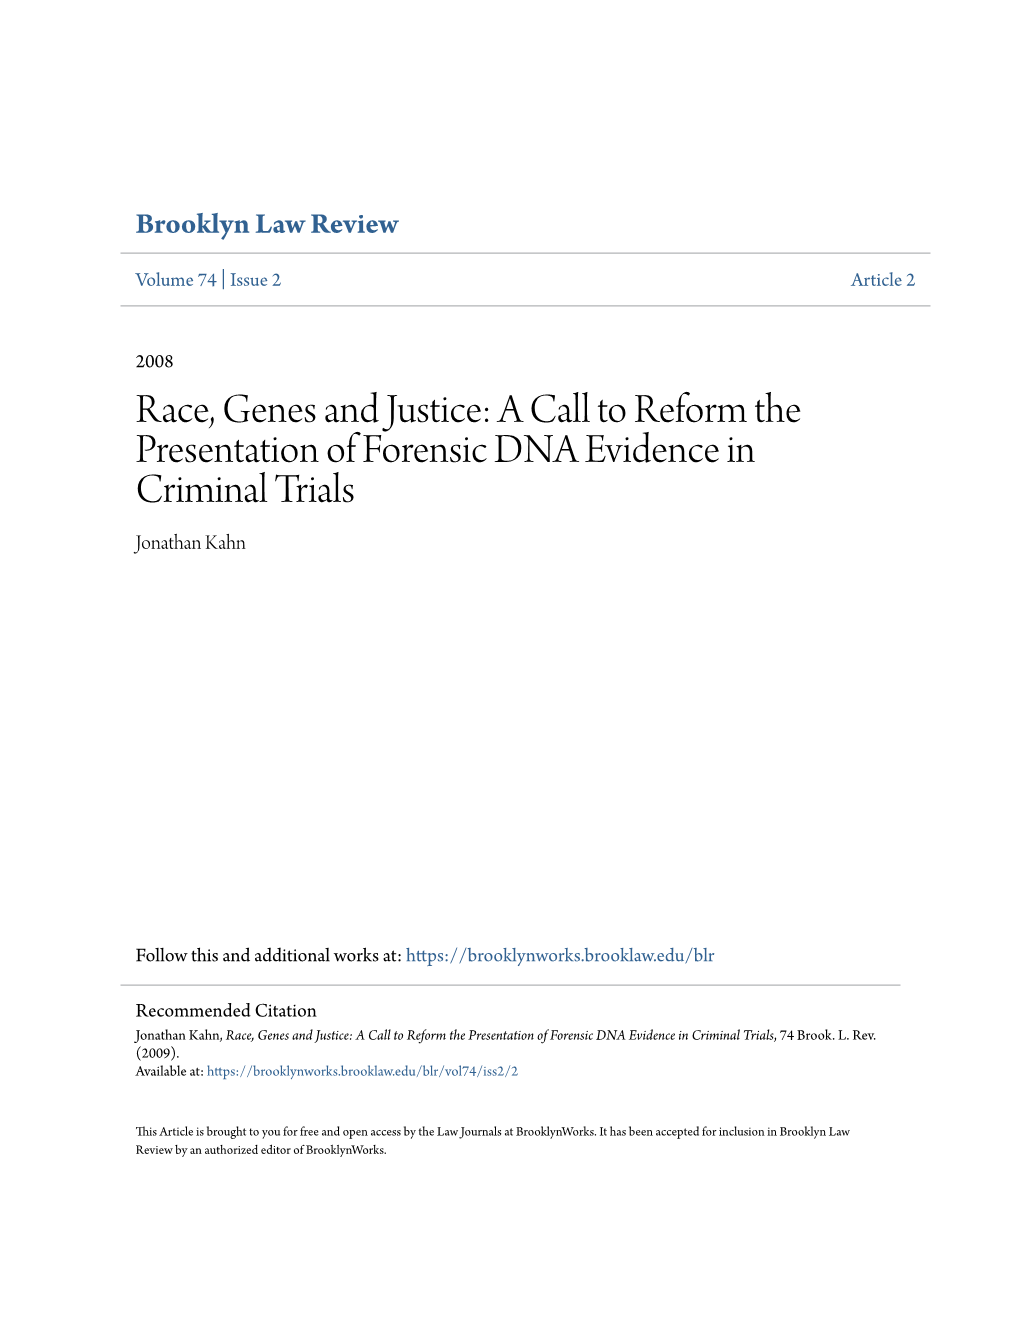 Race, Genes and Justice: a Call to Reform the Presentation of Forensic DNA Evidence in Criminal Trials Jonathan Kahn